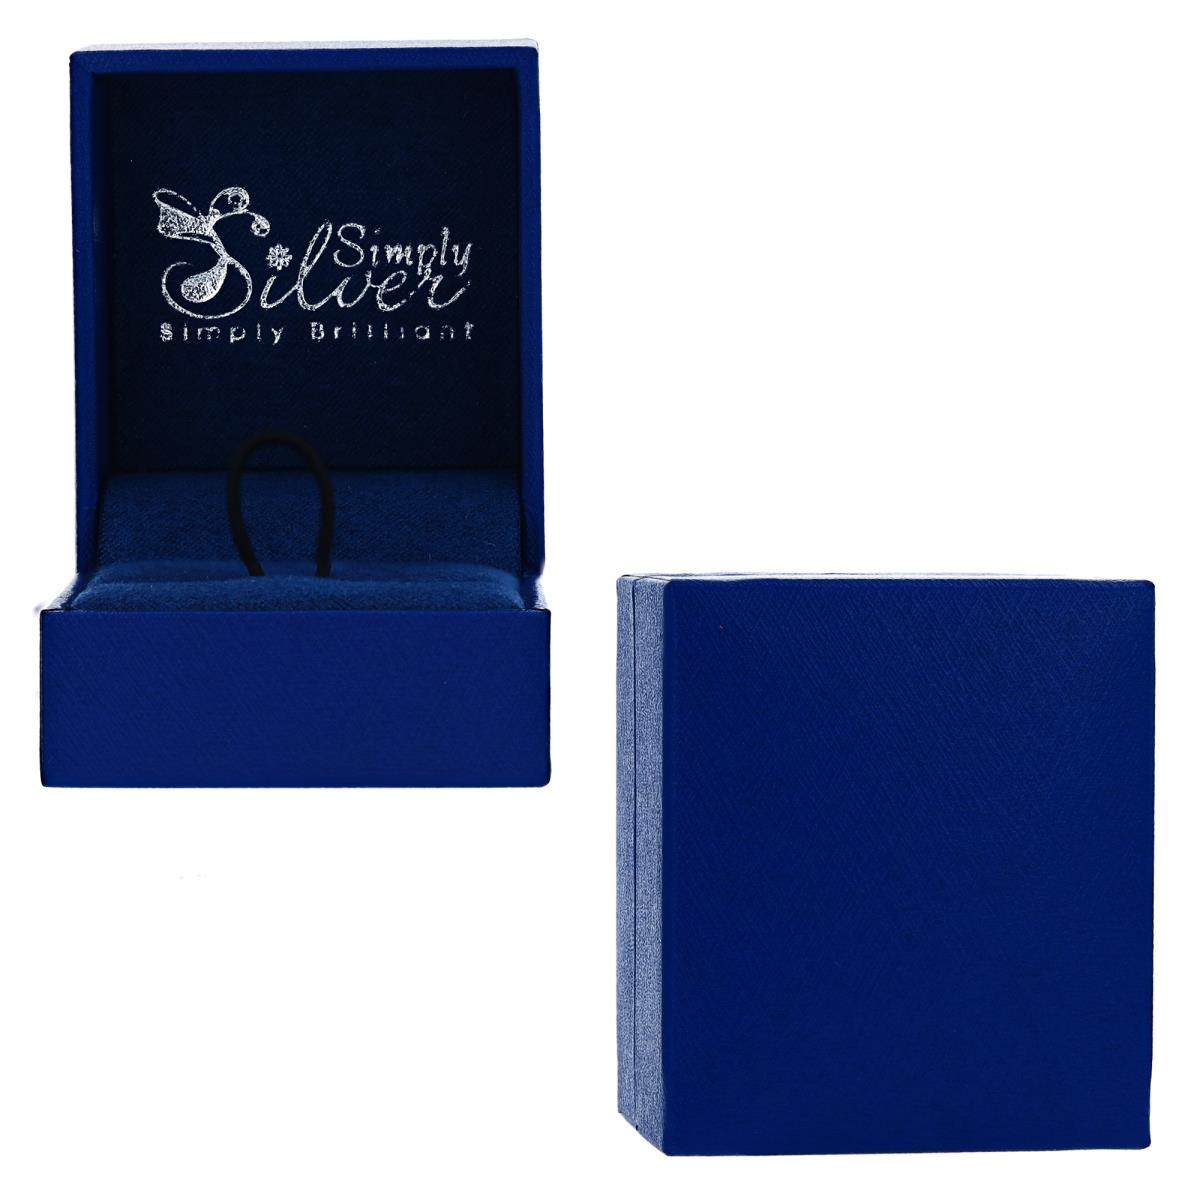 Simply Silver Simply Brilliant 14KT PLATE Hinged 48x53x36mm Blue Silver Foil Ring Box with Tie